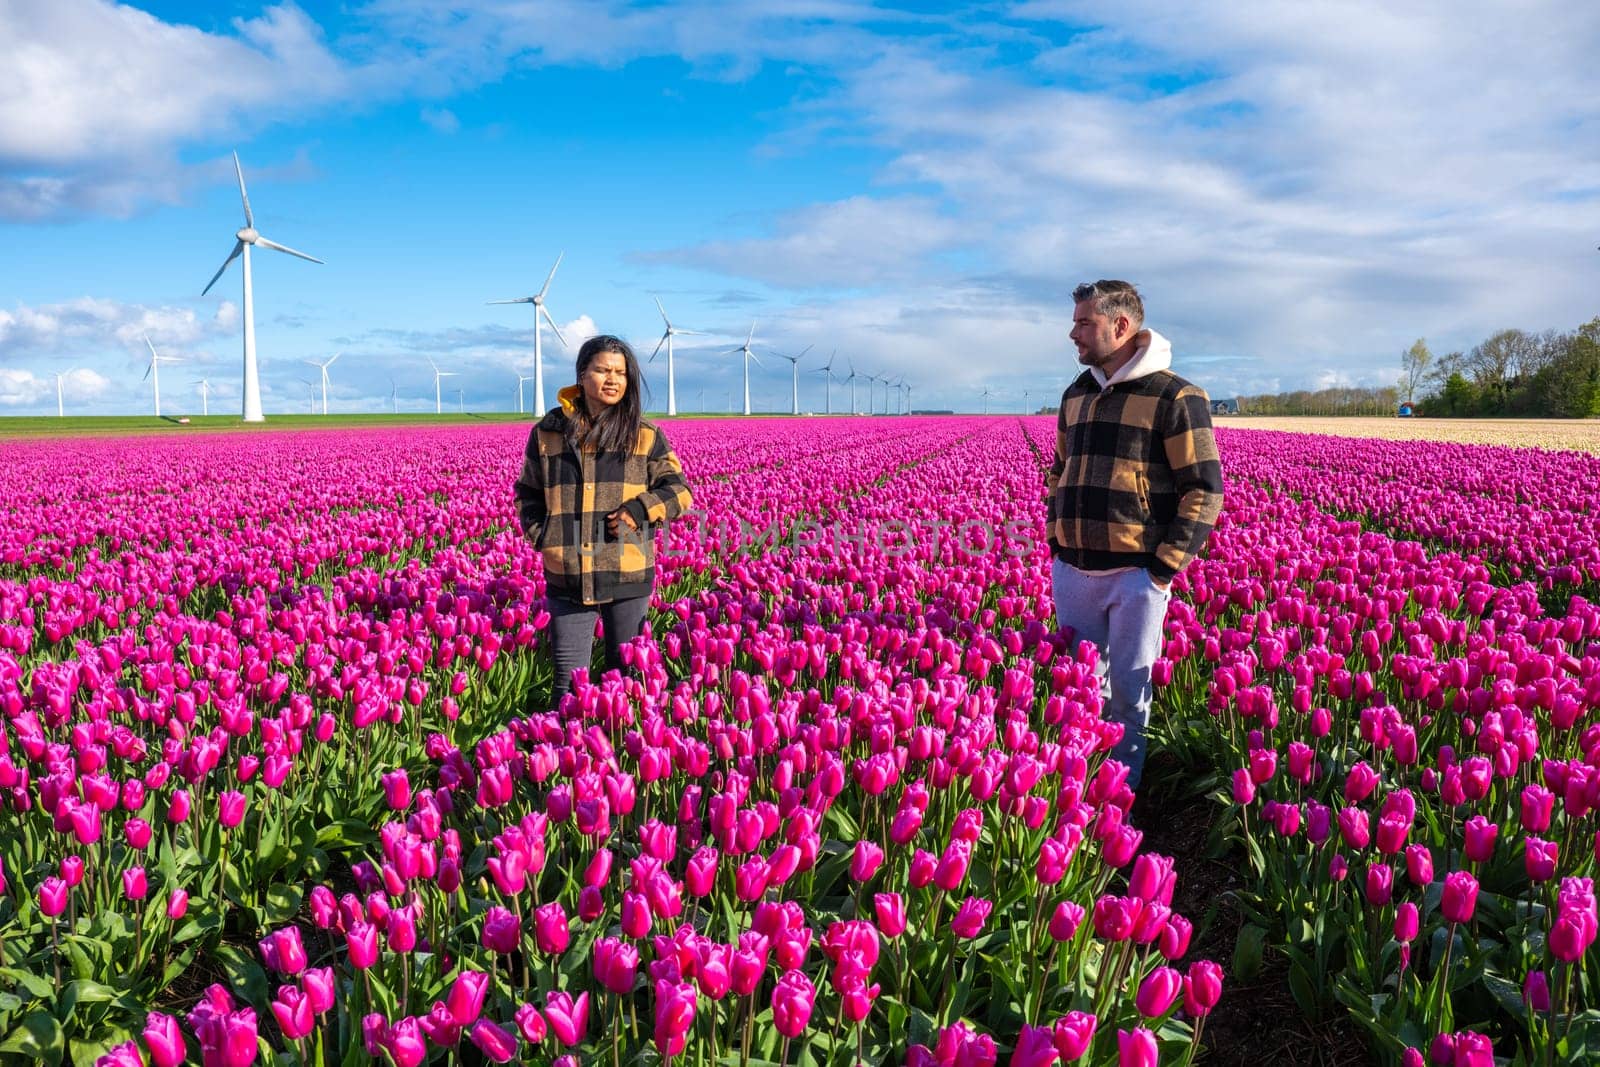 A couple embraces in a vast field of vibrant purple tulips, under the watchful gaze of towering windmill turbines in the Netherlands in Spring by fokkebok